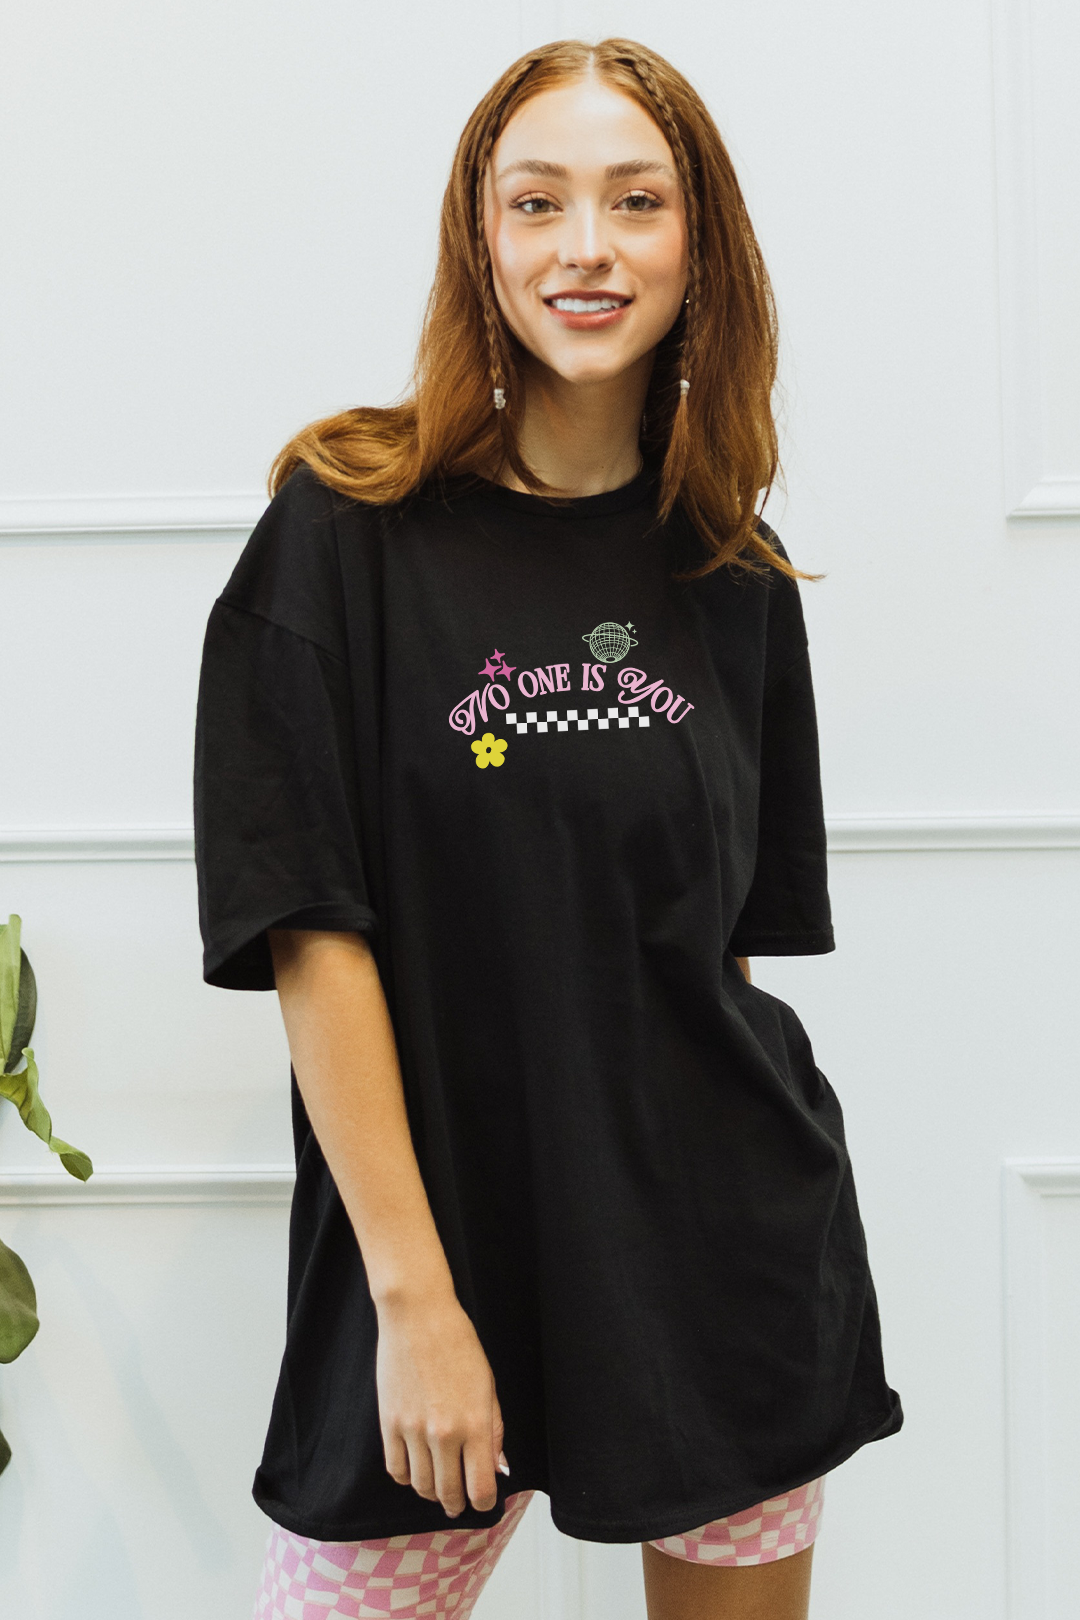 That is Your Power tee - Black